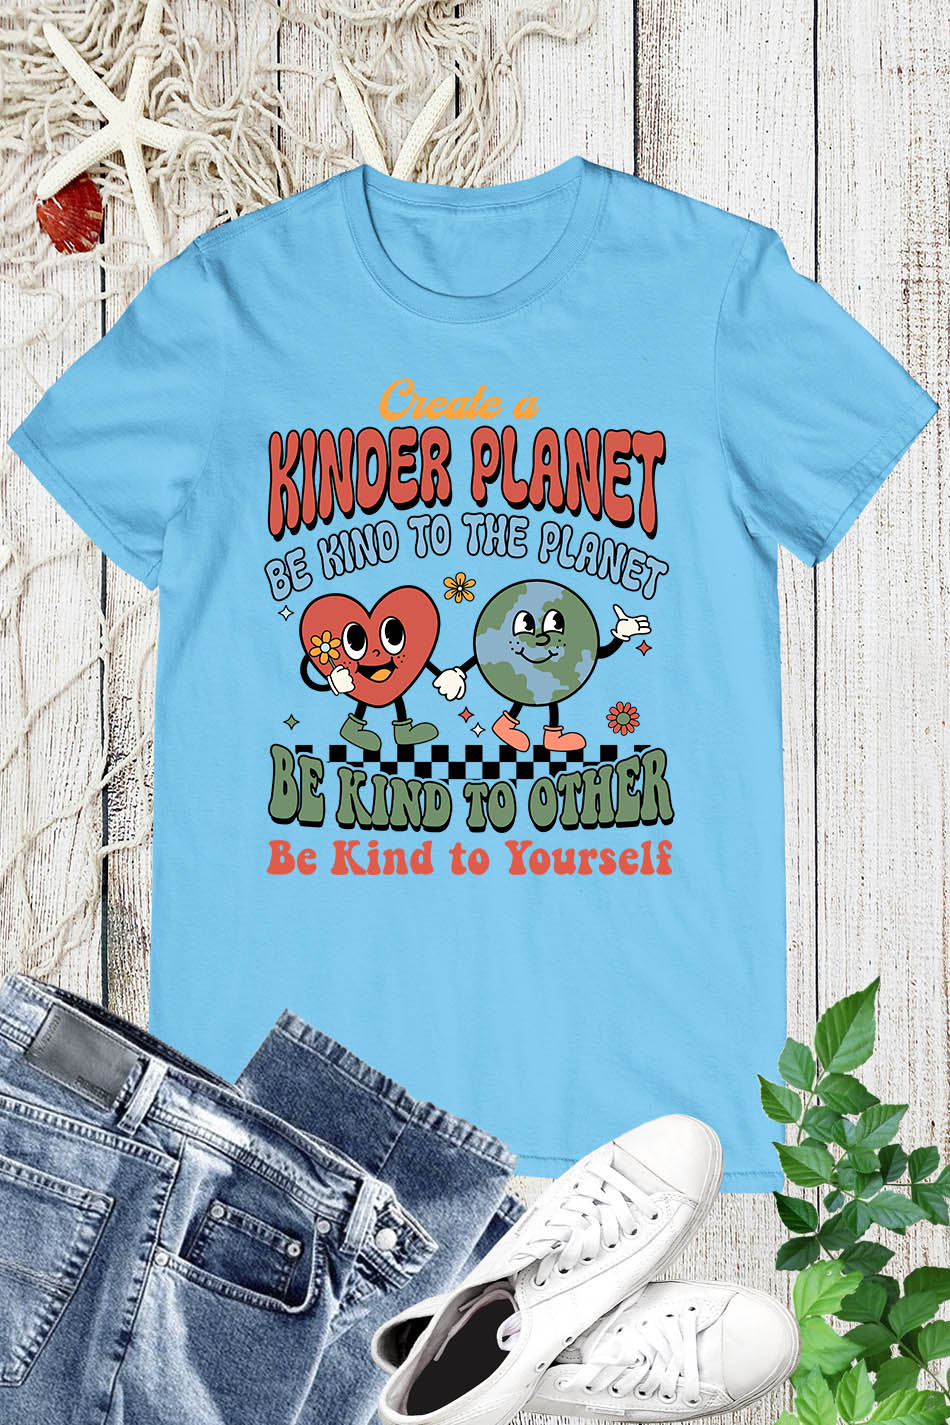 Create a Kinder Planet earth Day Shirt